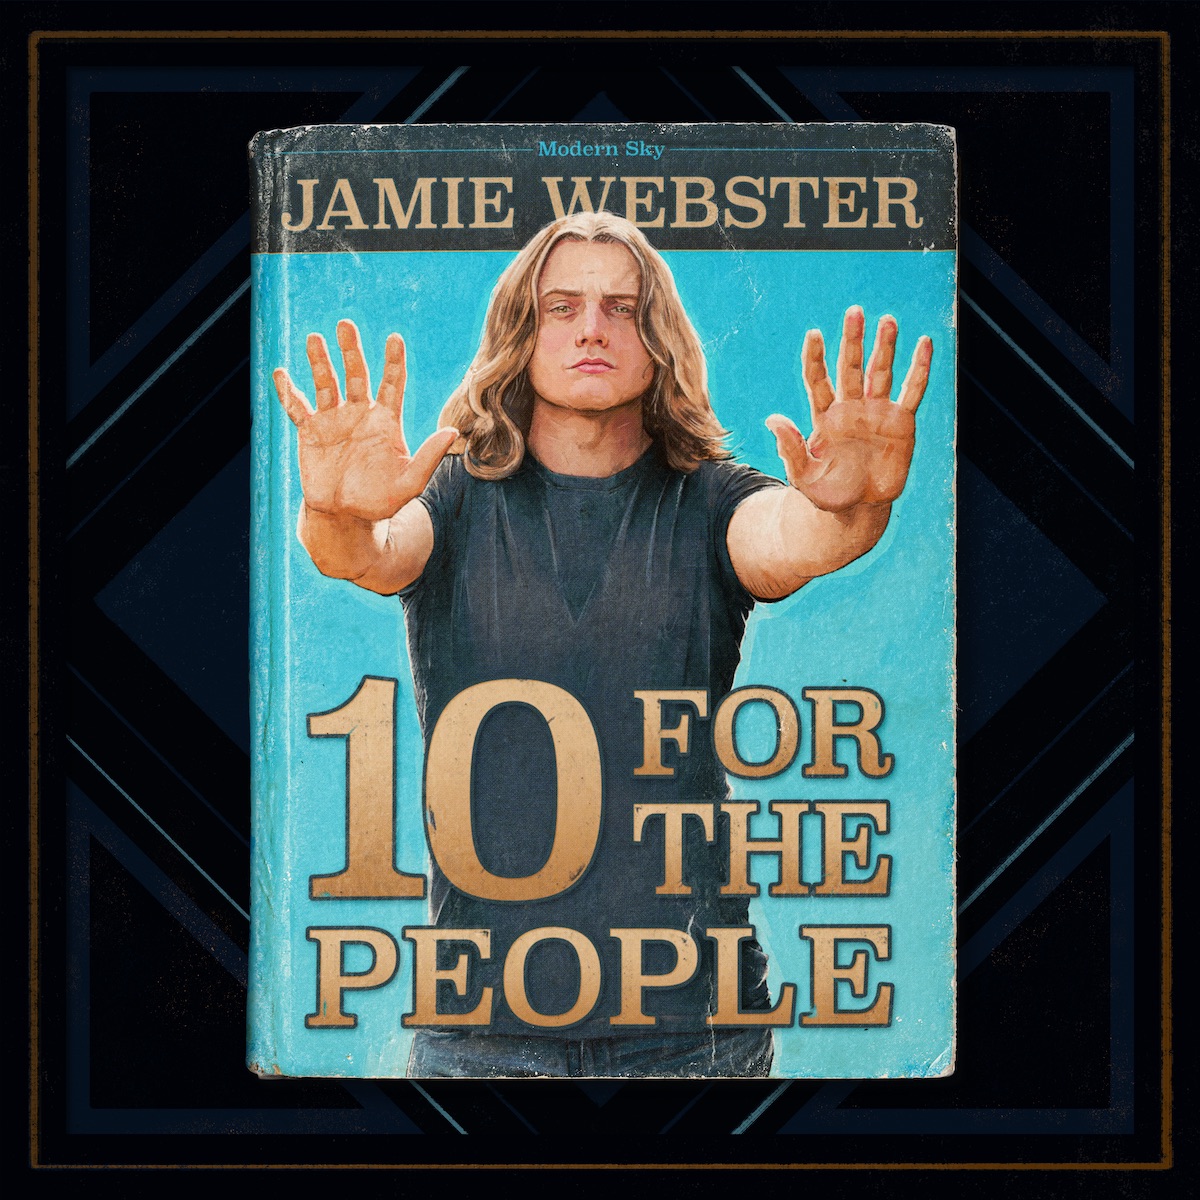 ALBUM REVIEW: 10 For the People by Jamie Webster